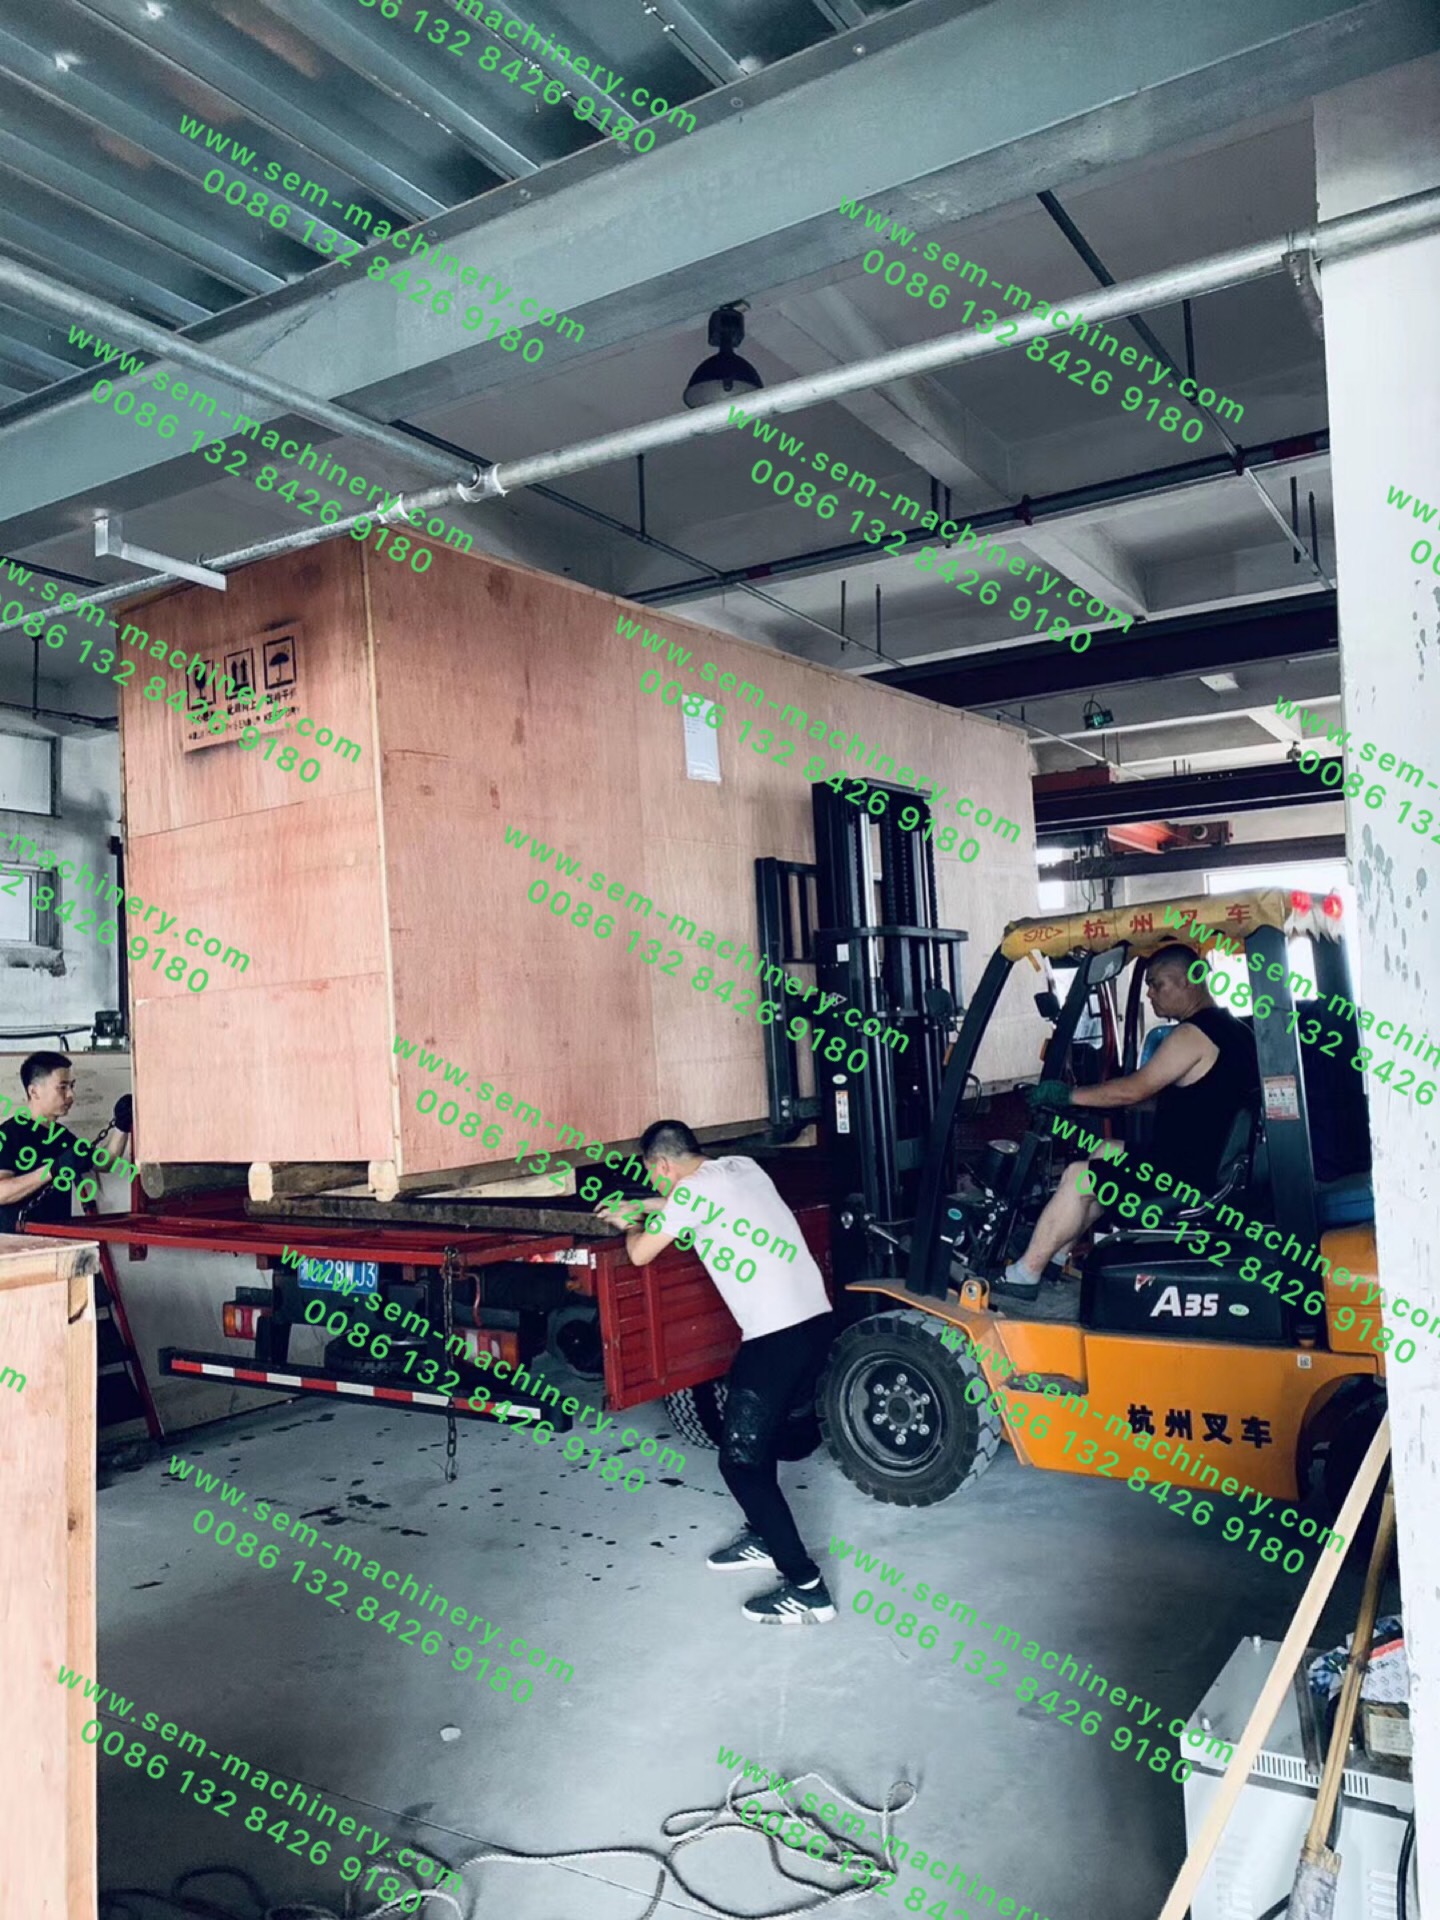 DGS-360 Filling Nozzle Machine Has Been Delivered To Customers